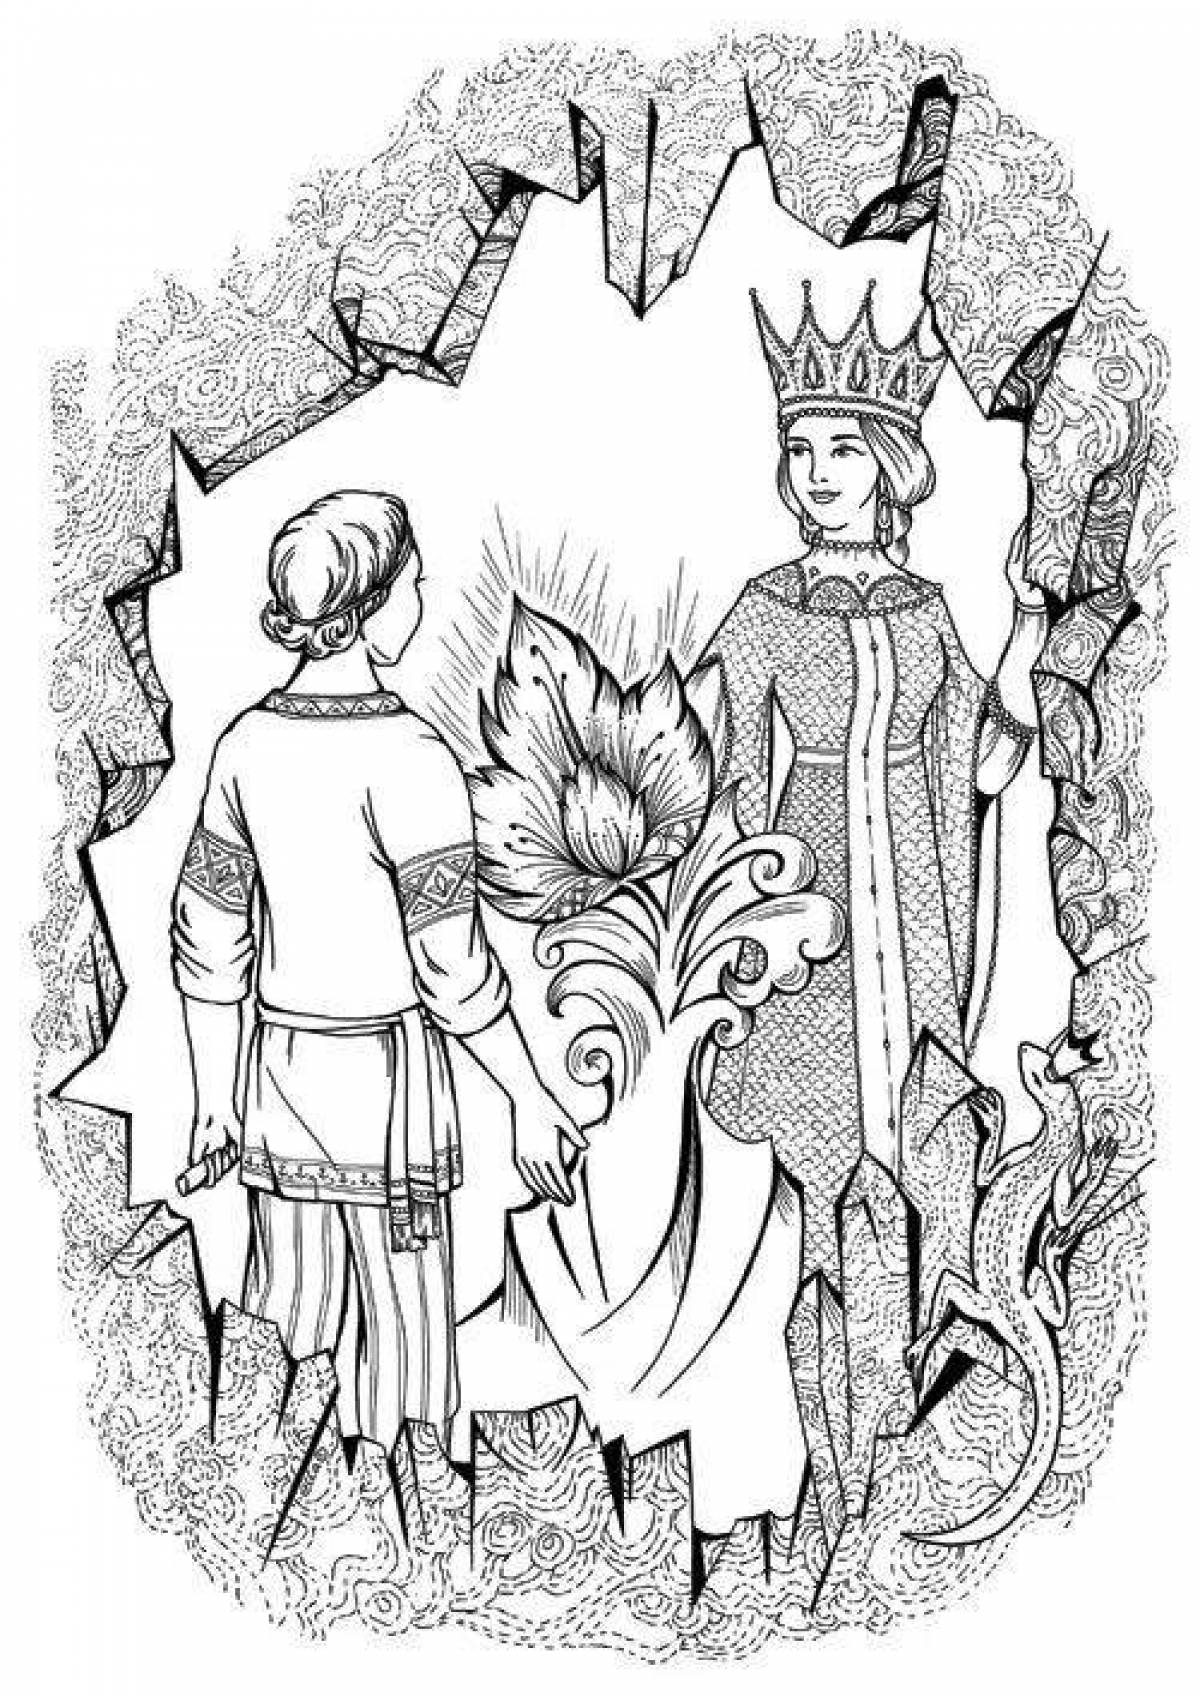 Amazing coloring book based on Bazhov's fairy tales